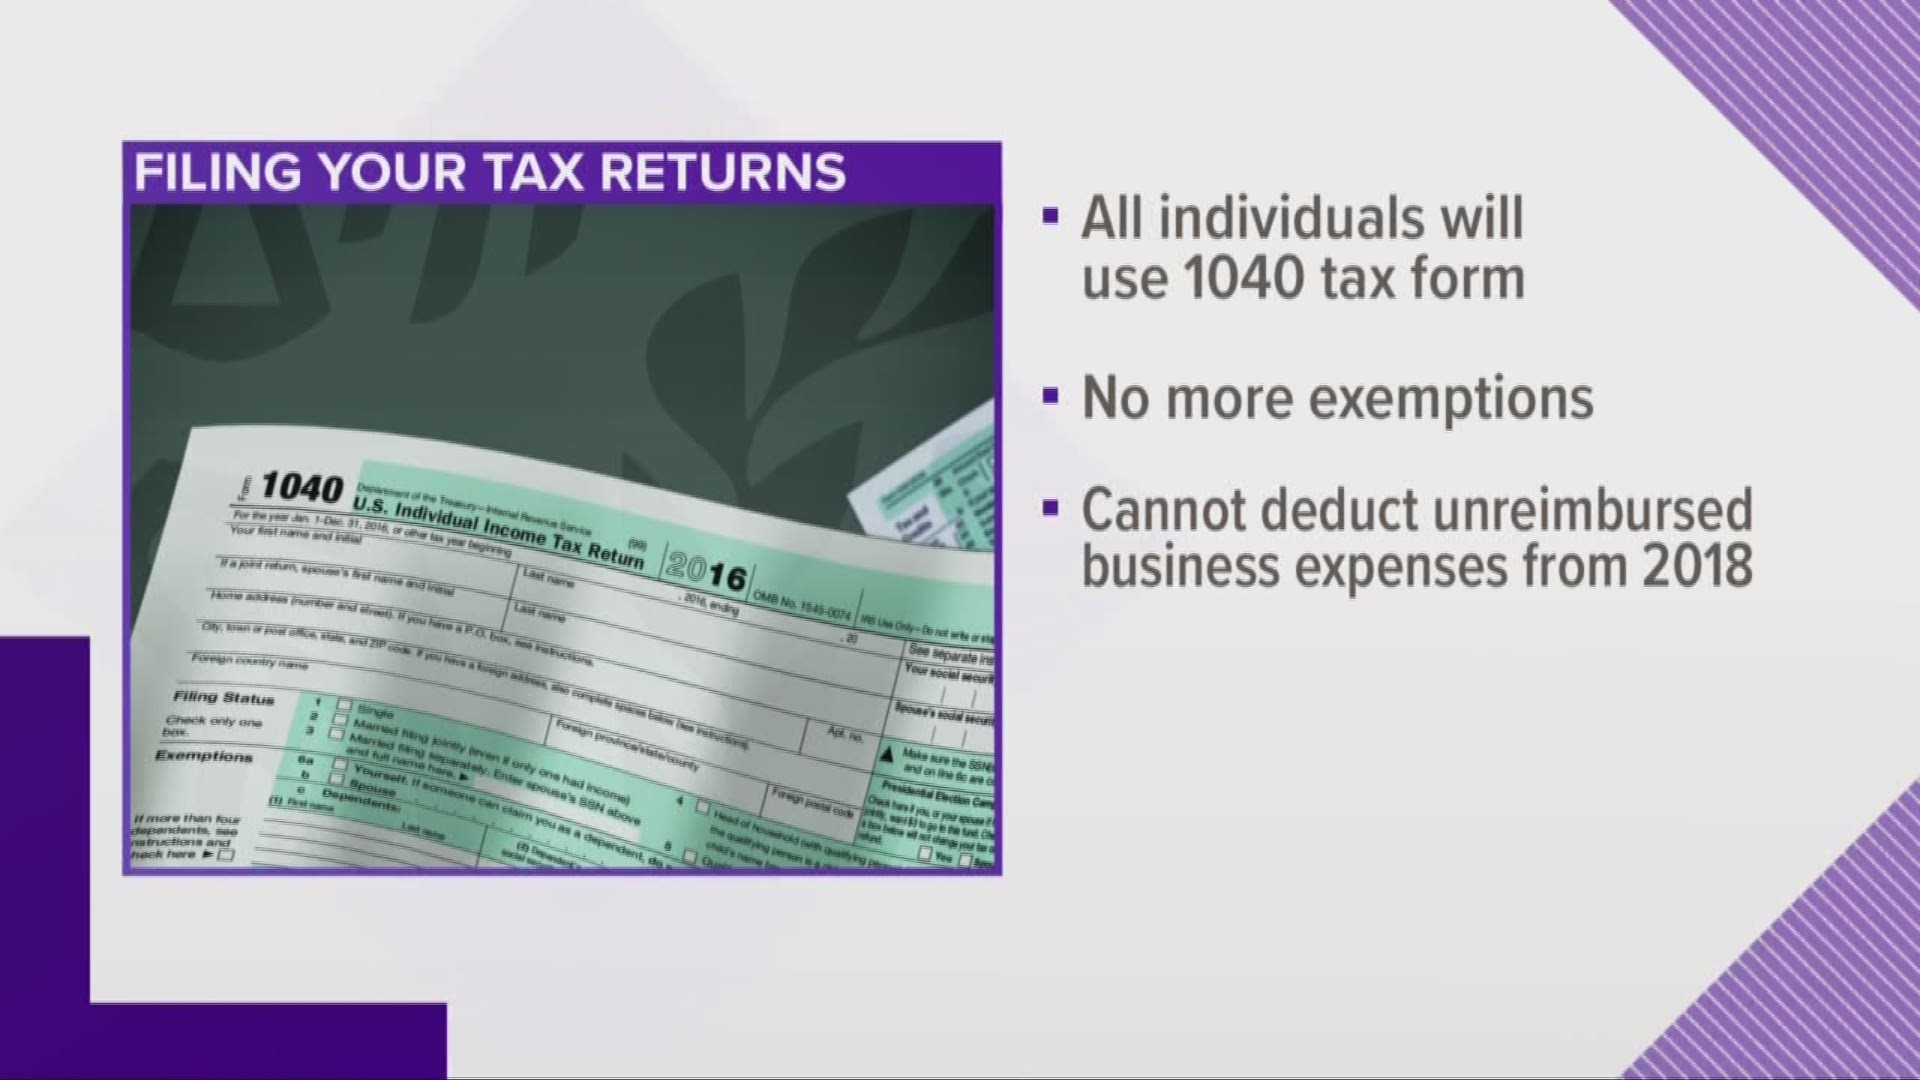 Your 2018 taxes are the first you'll file since the new federal tax laws went into effect.